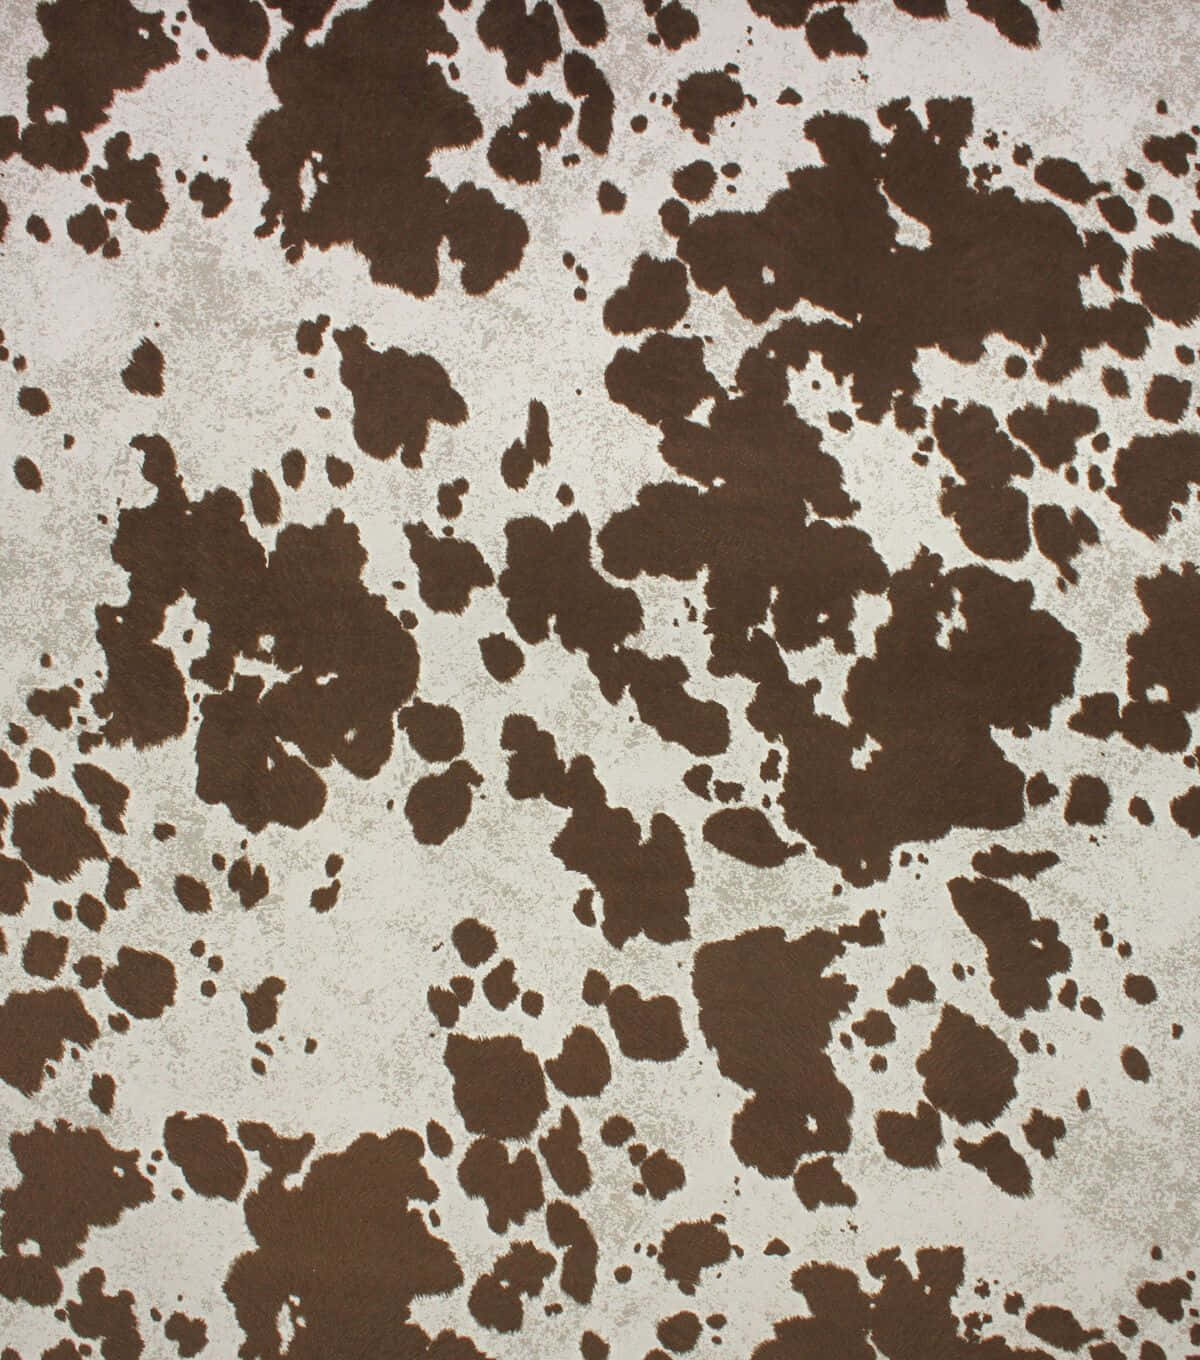 Cowhide Mural Cow Print Wallpaper for Walls  anewall  Anewall